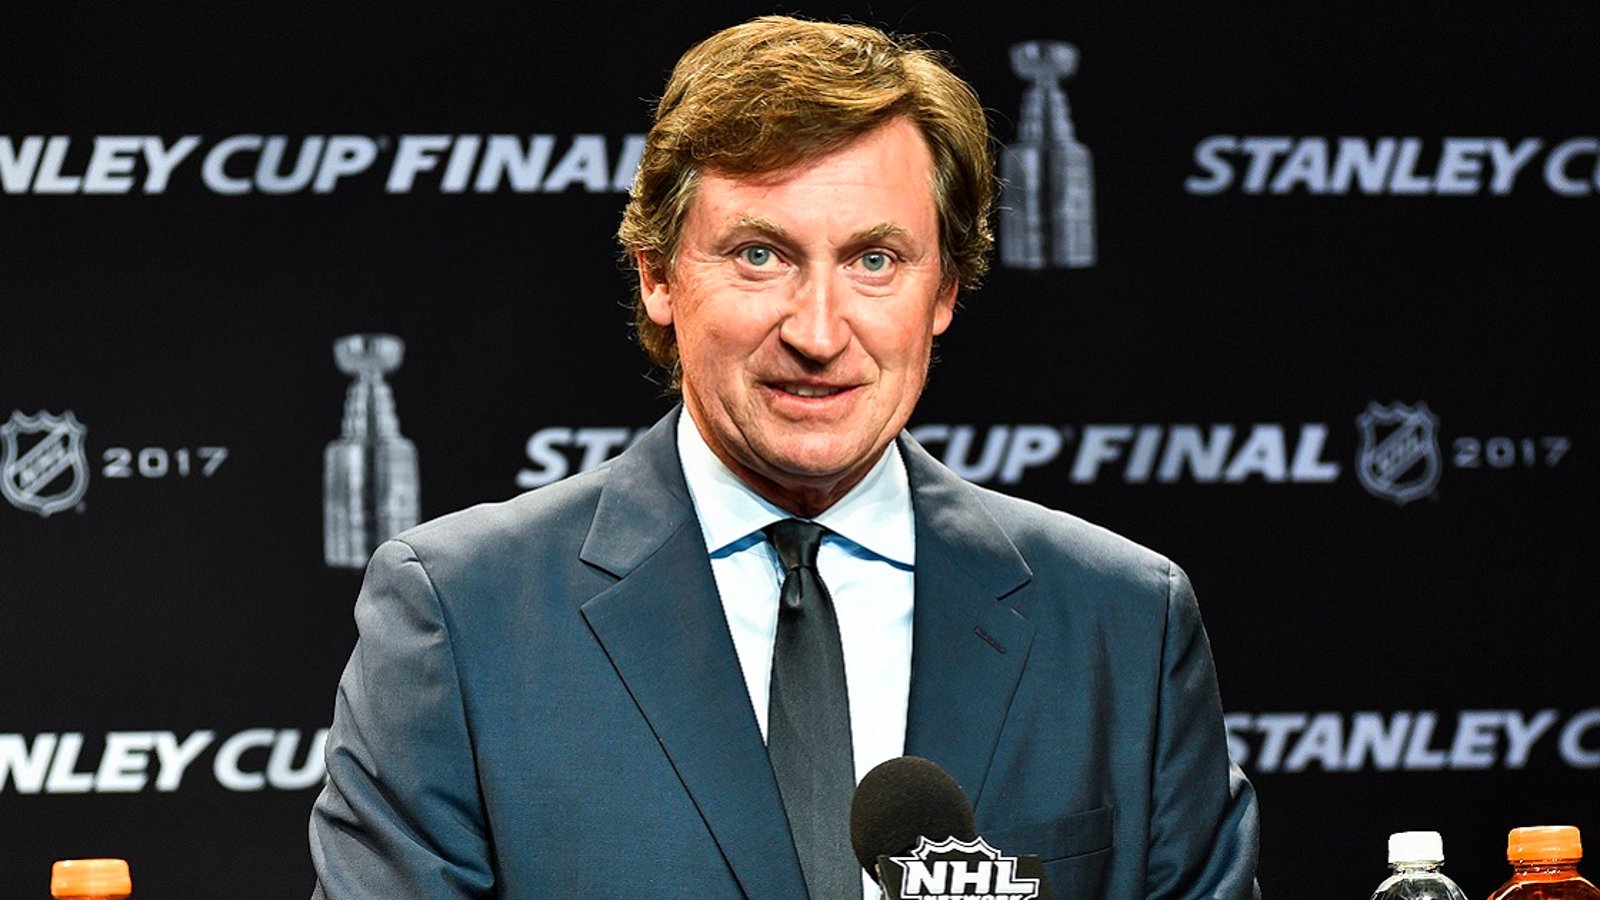 Oilers make 2 roster changes amidst major pressure from Katz and Gretzky.